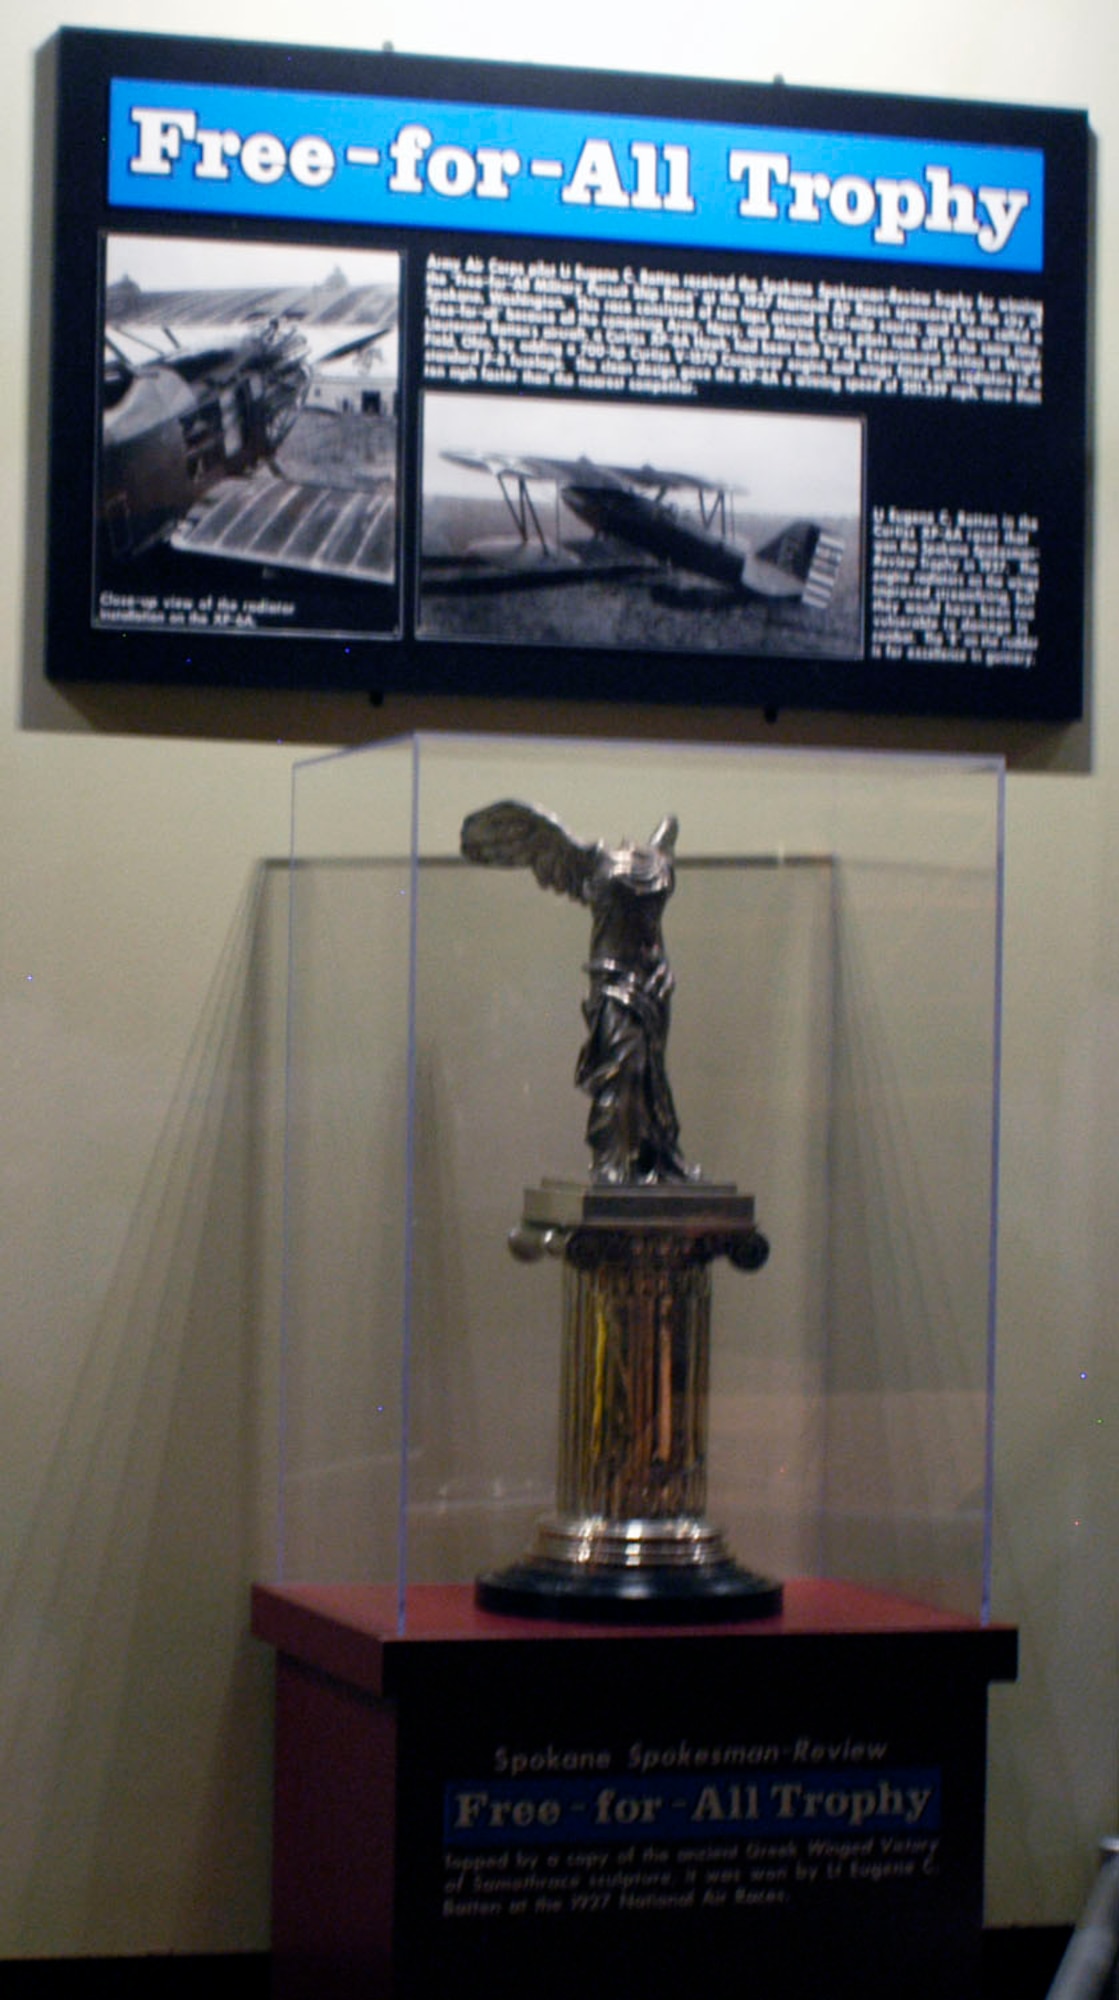 DAYTON, Ohio -- Free-for-All Trophy in the Early Years Gallery at the National Museum of the United States Air Force. (U.S. Air Force photo)